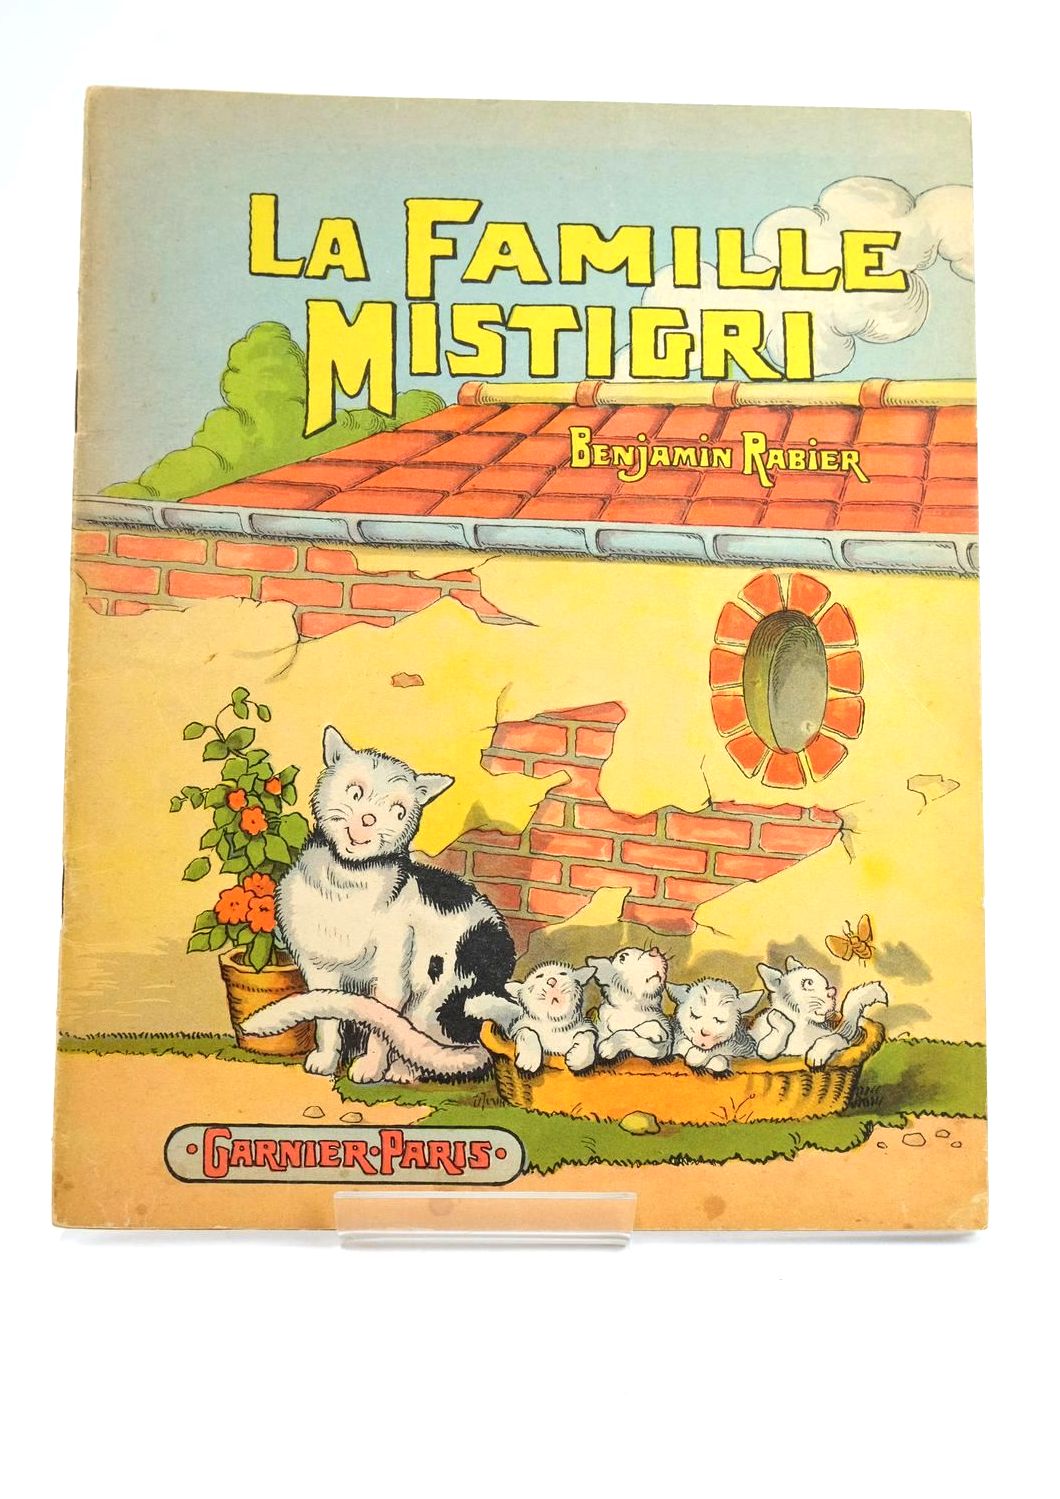 Photo of LA RAMILLE MISTIGRI written by Rabier, Benjamin illustrated by Rabier, Benjamin published by Garnier Paris (STOCK CODE: 1323687)  for sale by Stella & Rose's Books